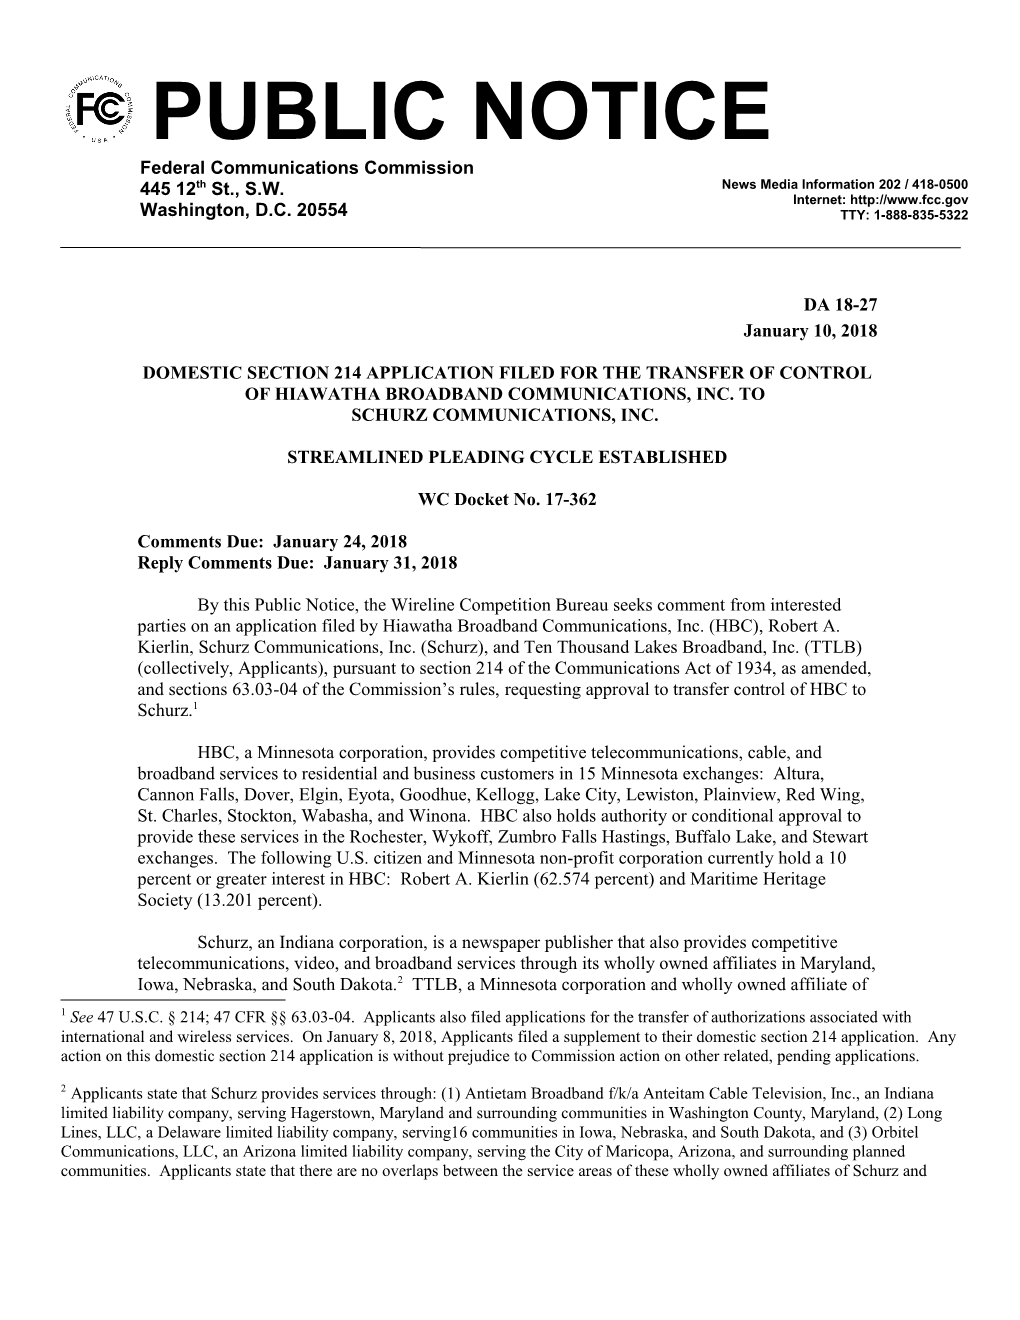 Domestic Section 214 Application Filed for the Transfer of Control of Hiawatha Broadband